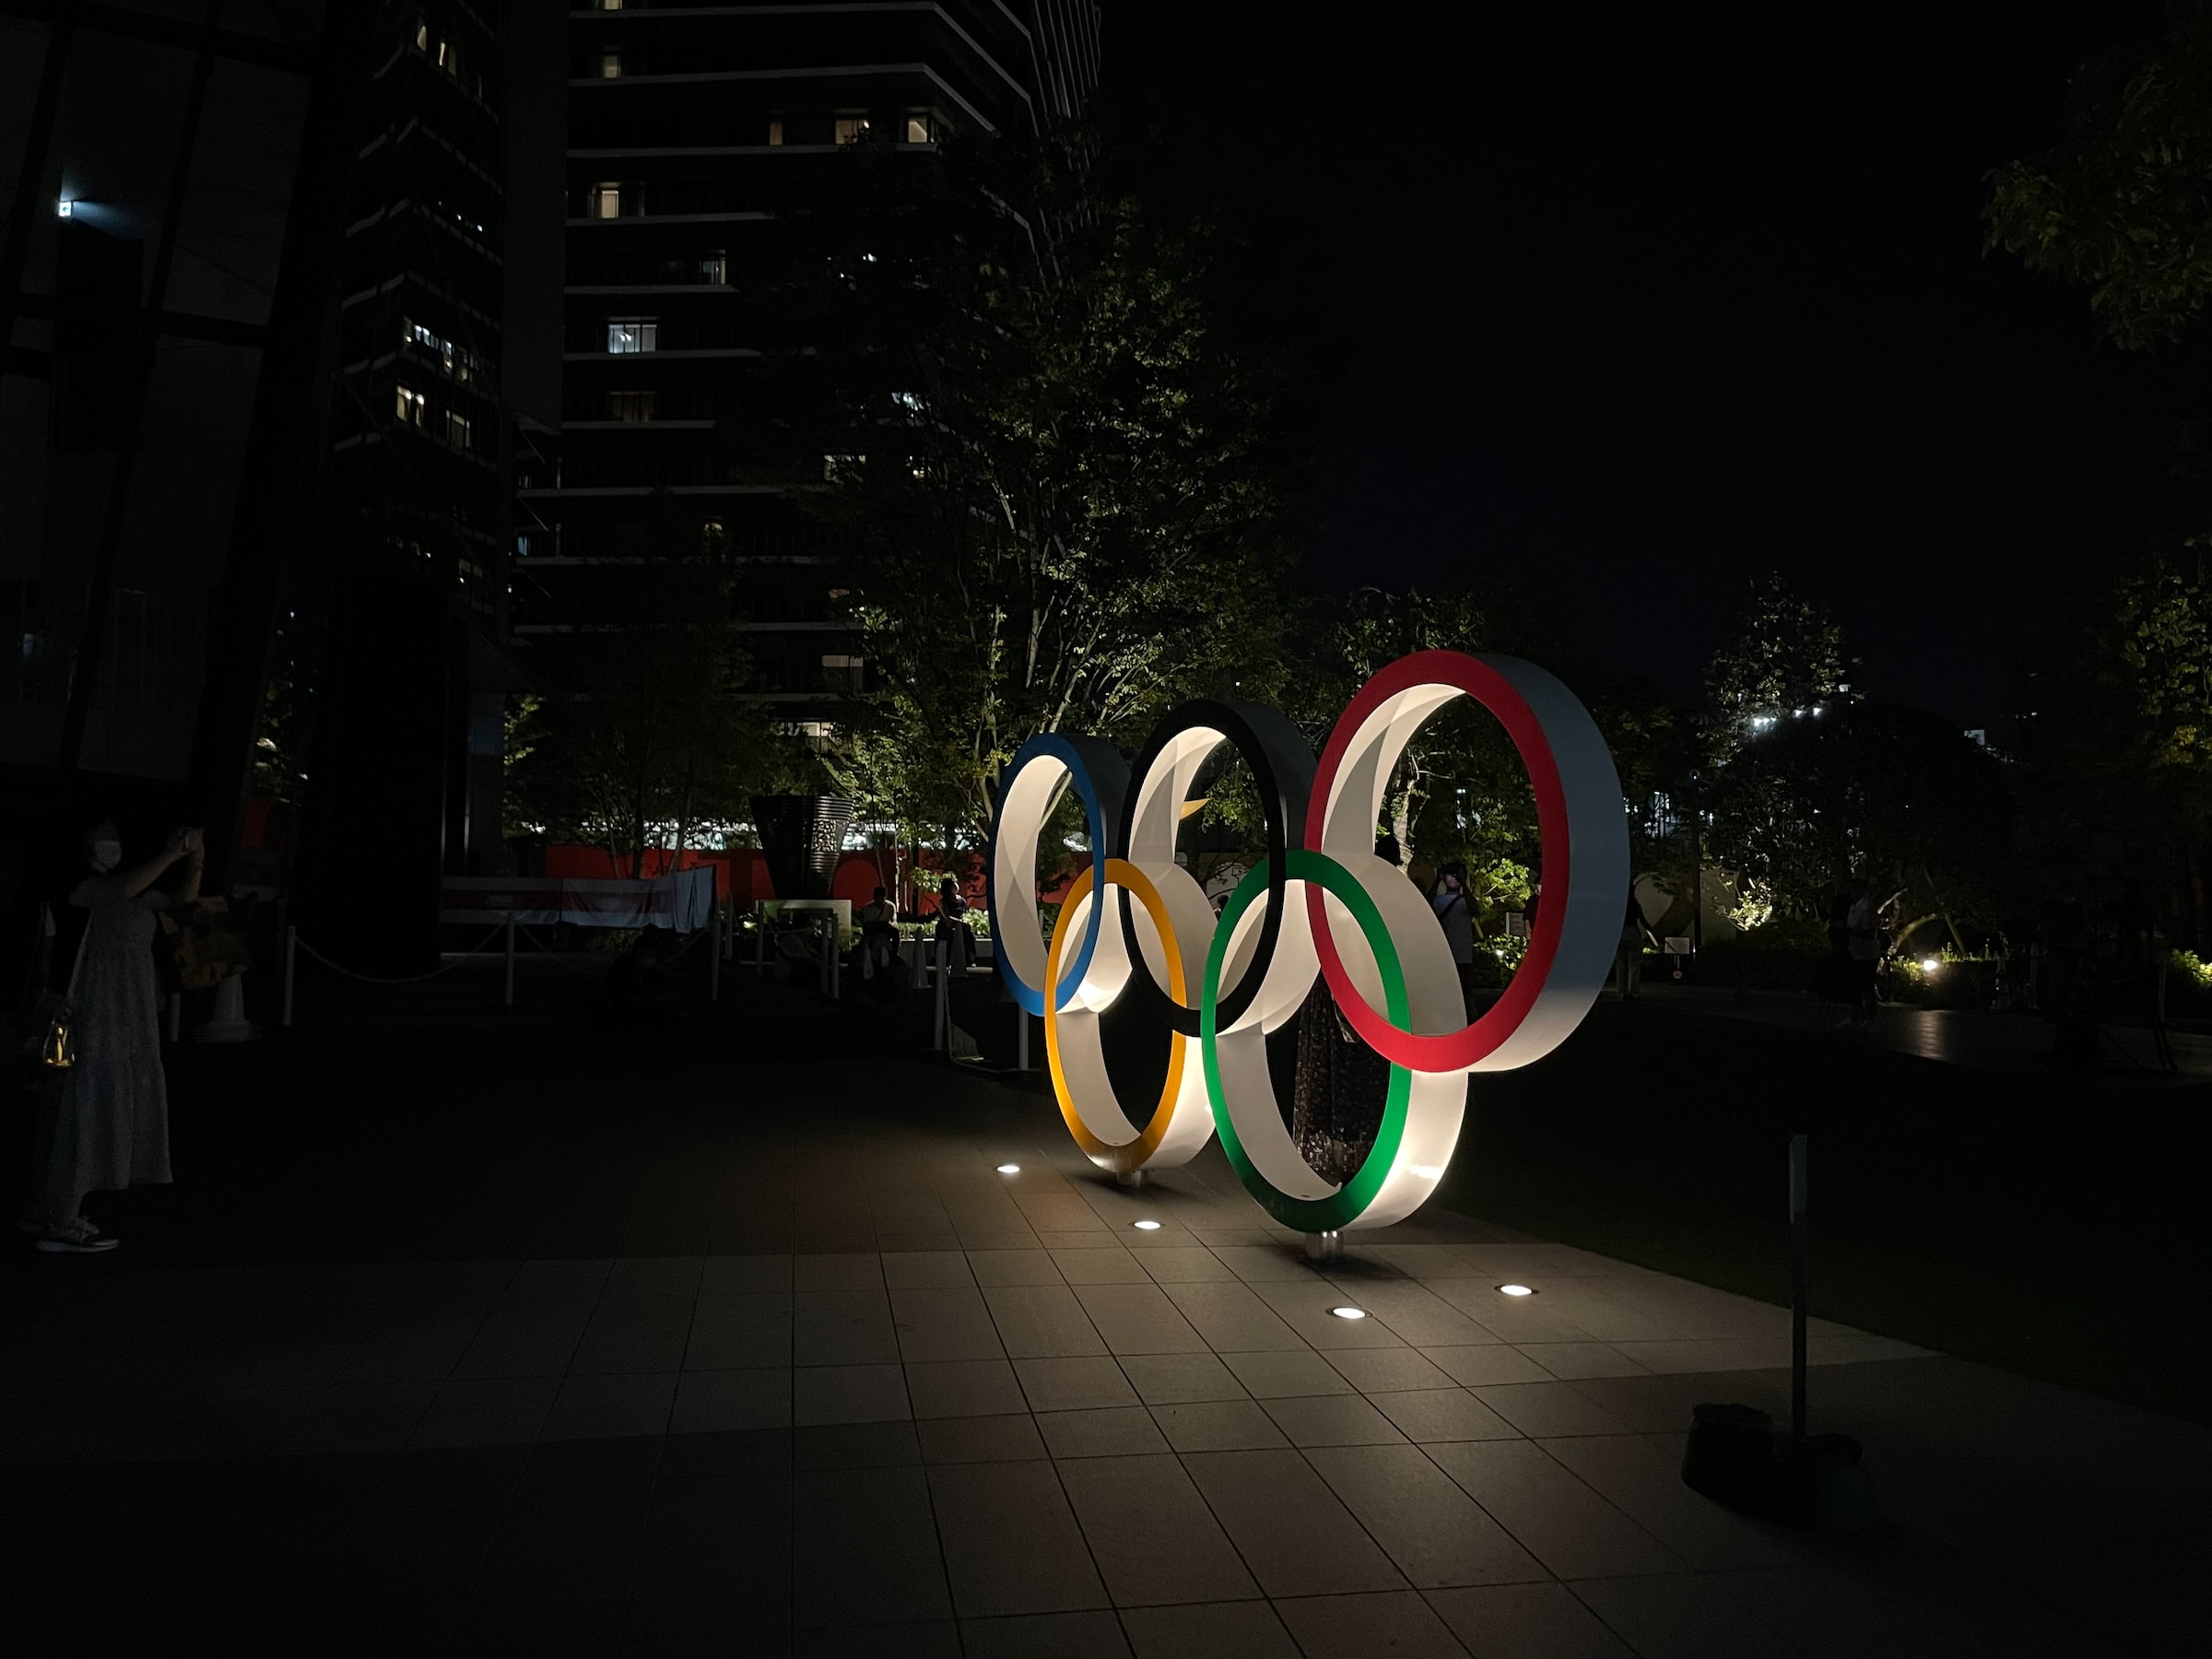 Olympic rings statue in Tokyo